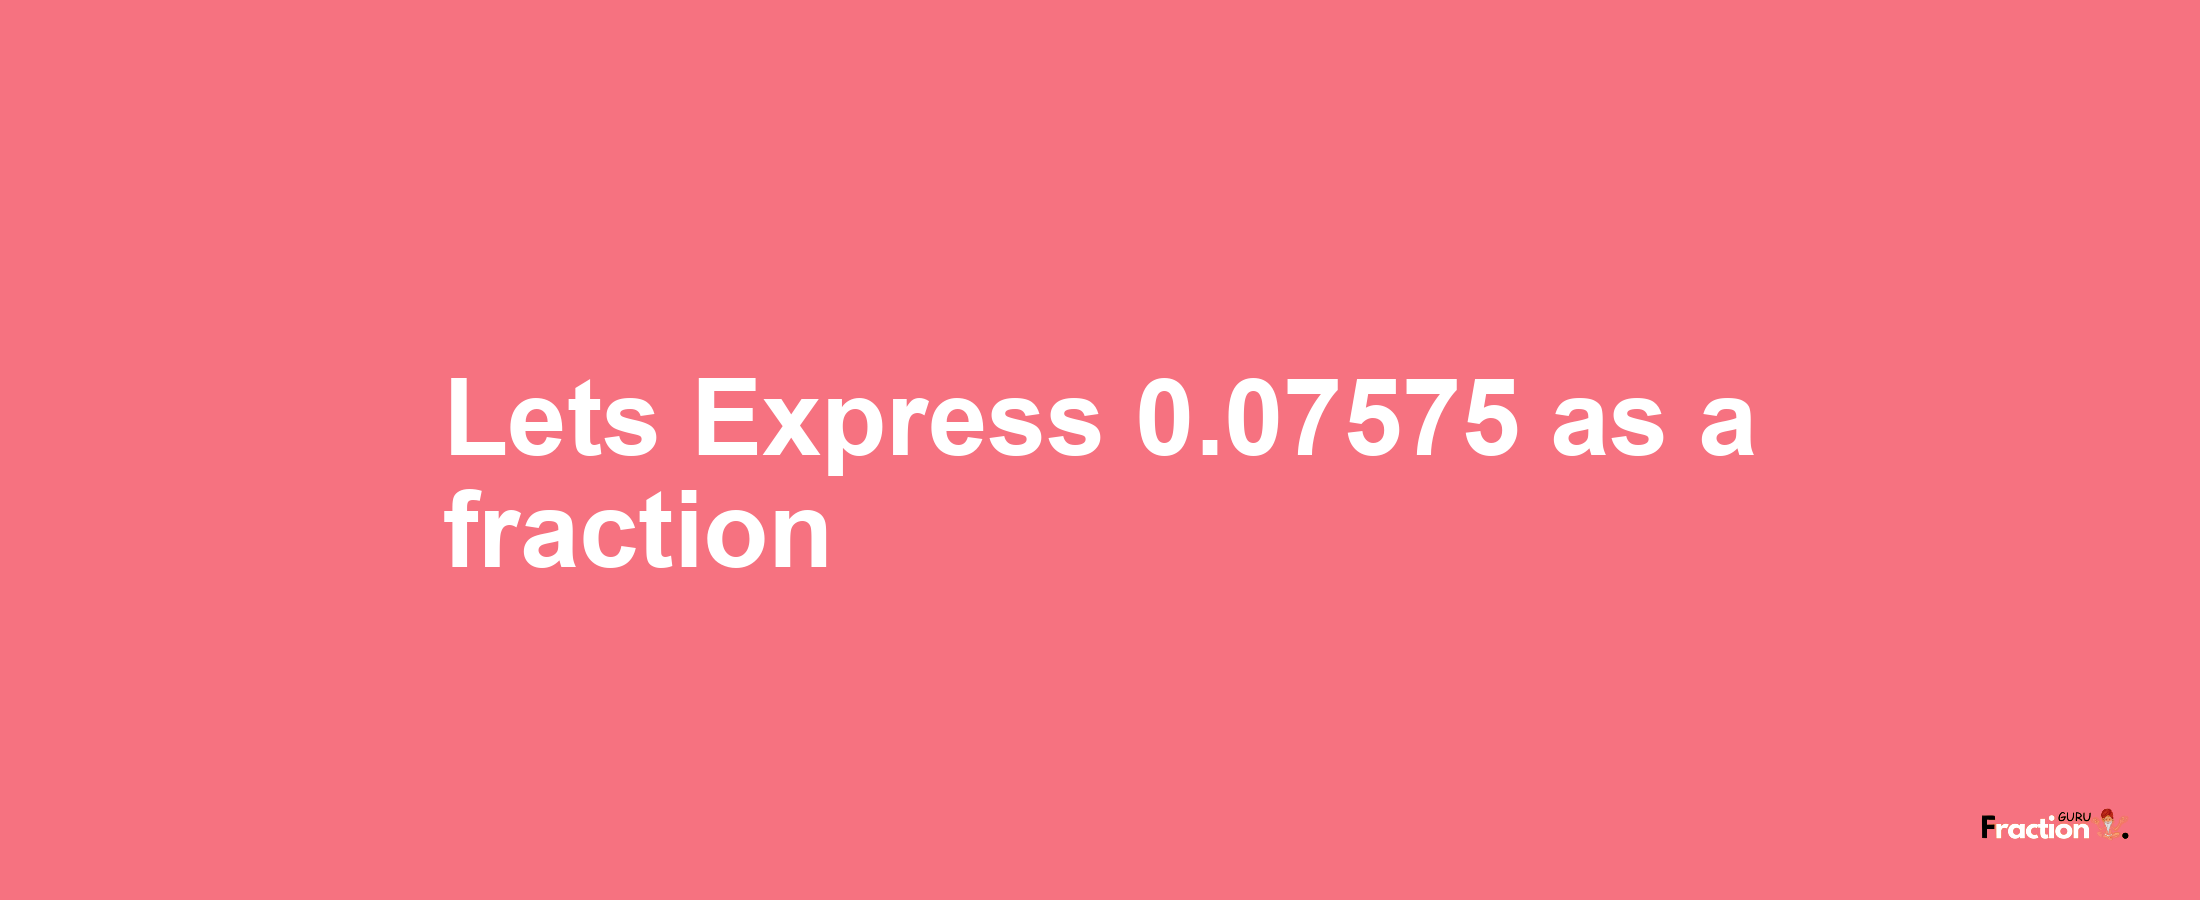 Lets Express 0.07575 as afraction